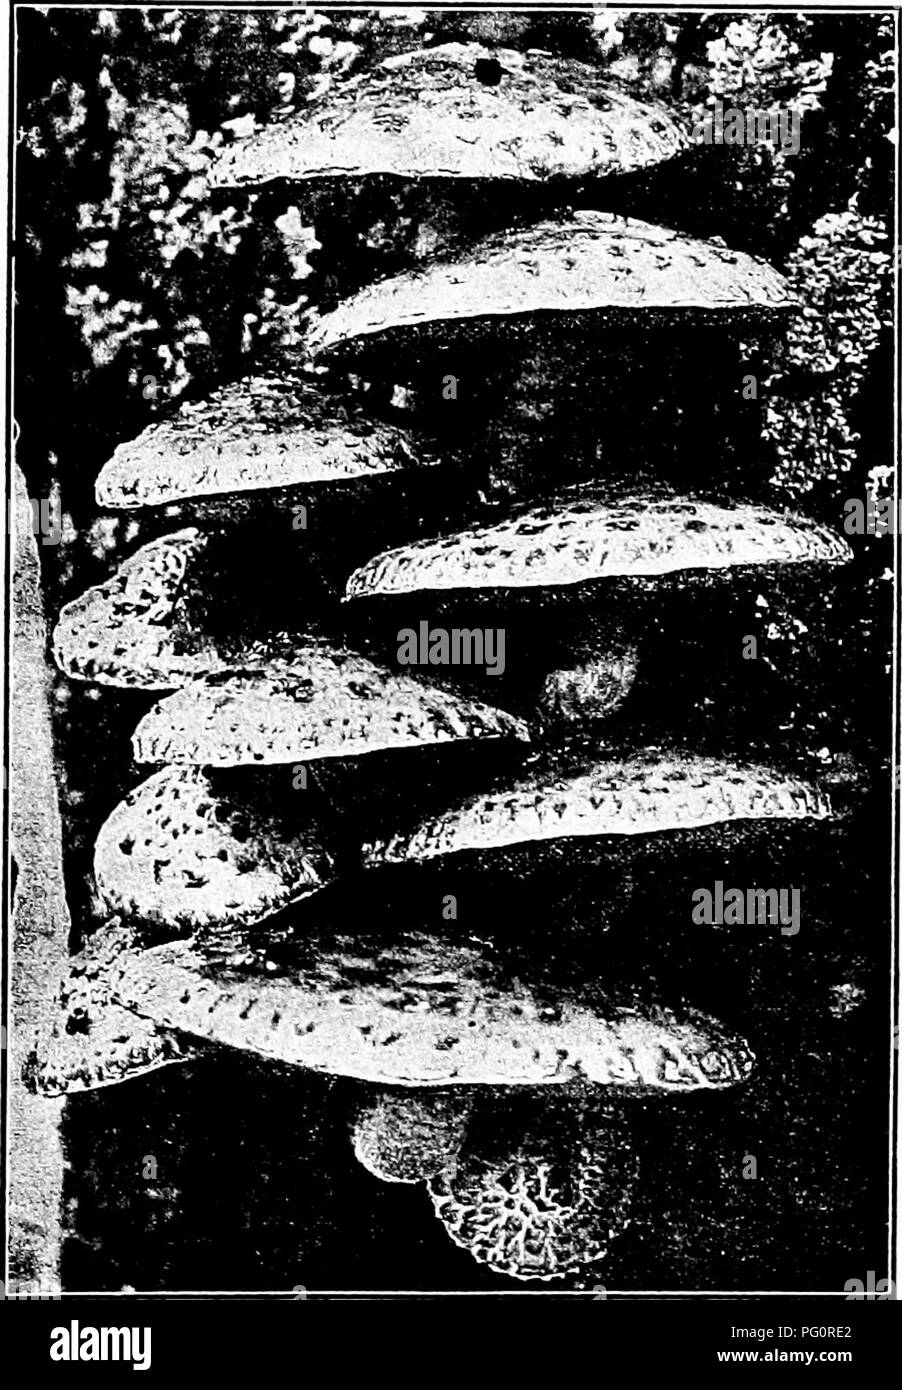 . The fungi which cause plant disease . Plant diseases; Fungi. THE FUNGI WHICH CAUSE PLANT DISEASE 453 annulus none; volva present. Easily distinguished from all otlier pink-spored genera by the volva. Fig. 322. About thirtj'-six species.. Fig. 321.—Pholiota adiposa. After Clements. V. bombycina (Scha.) Quel. Cap large, 8-25 cm. wide, all white and silky, more rarelj' some- what scaly, hemispheric or bell-shaped to convex; stem 8-12 cm. by 1-2 cm., white, smooth, tapering upward, solid, volva large and spreading; gills free, salmon-pink, crowded, spores elliptic, 6-7 X 4 ^. It is often parasit Stock Photo